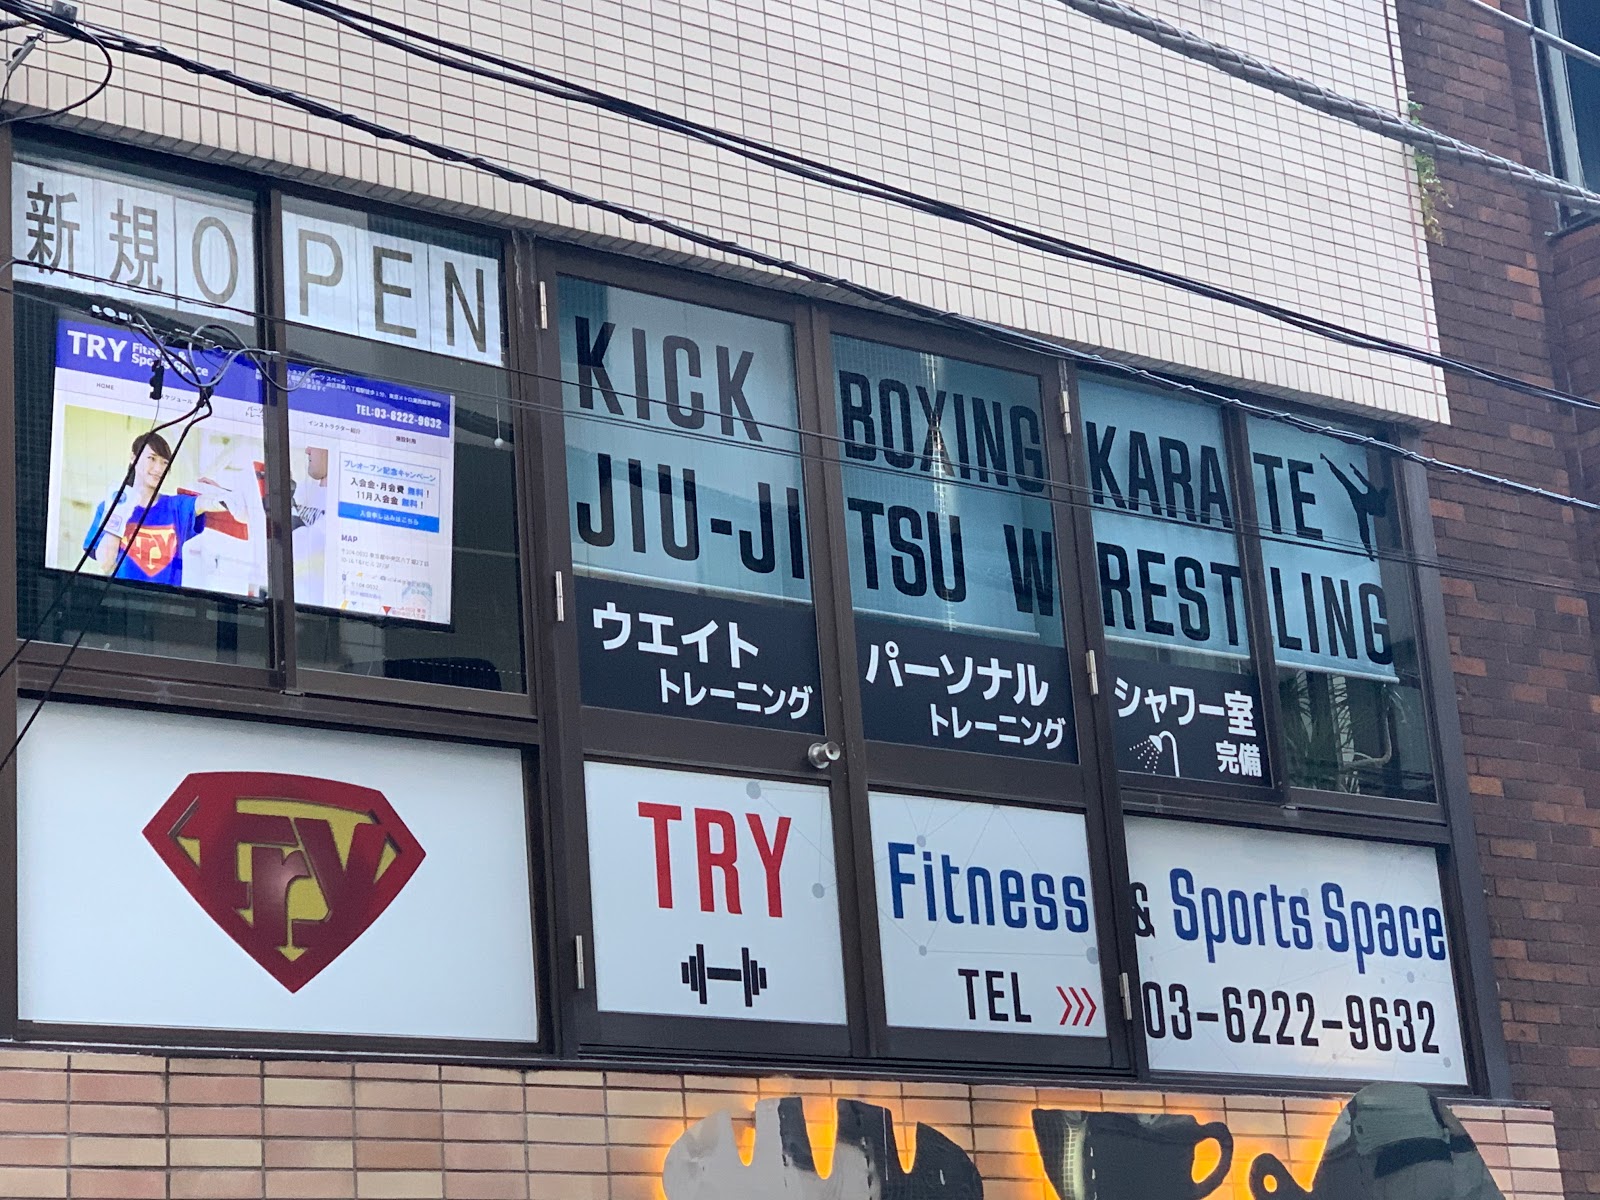 TRY Fitness ＆ Sports Space（トライフィットネスアンドスポーツスペース）にて